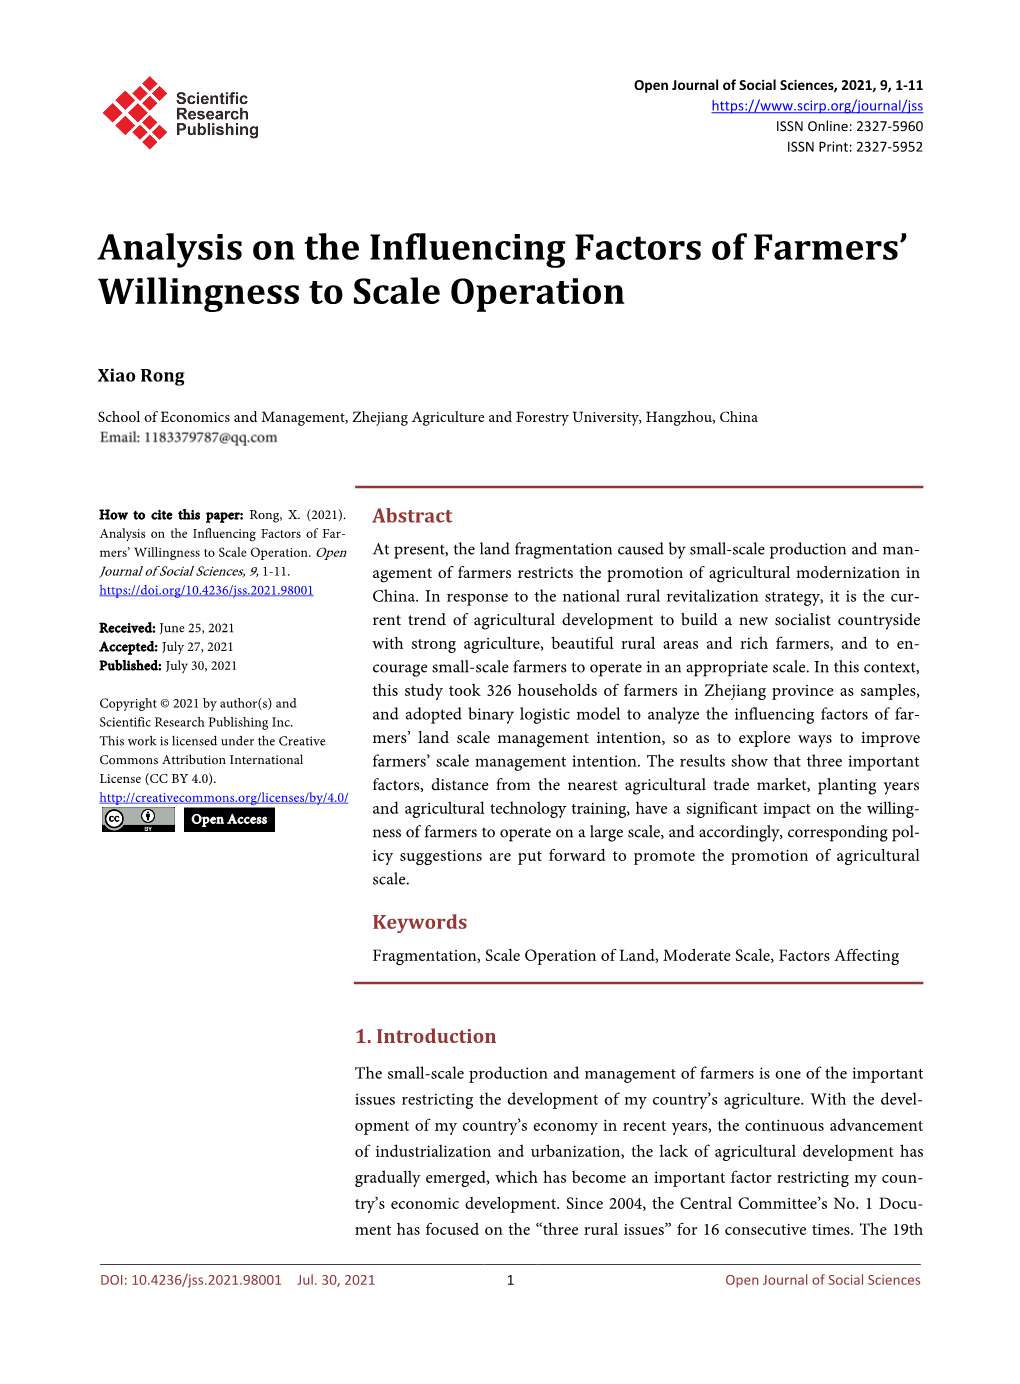 Analysis on the Influencing Factors of Farmers' Willingness to Scale